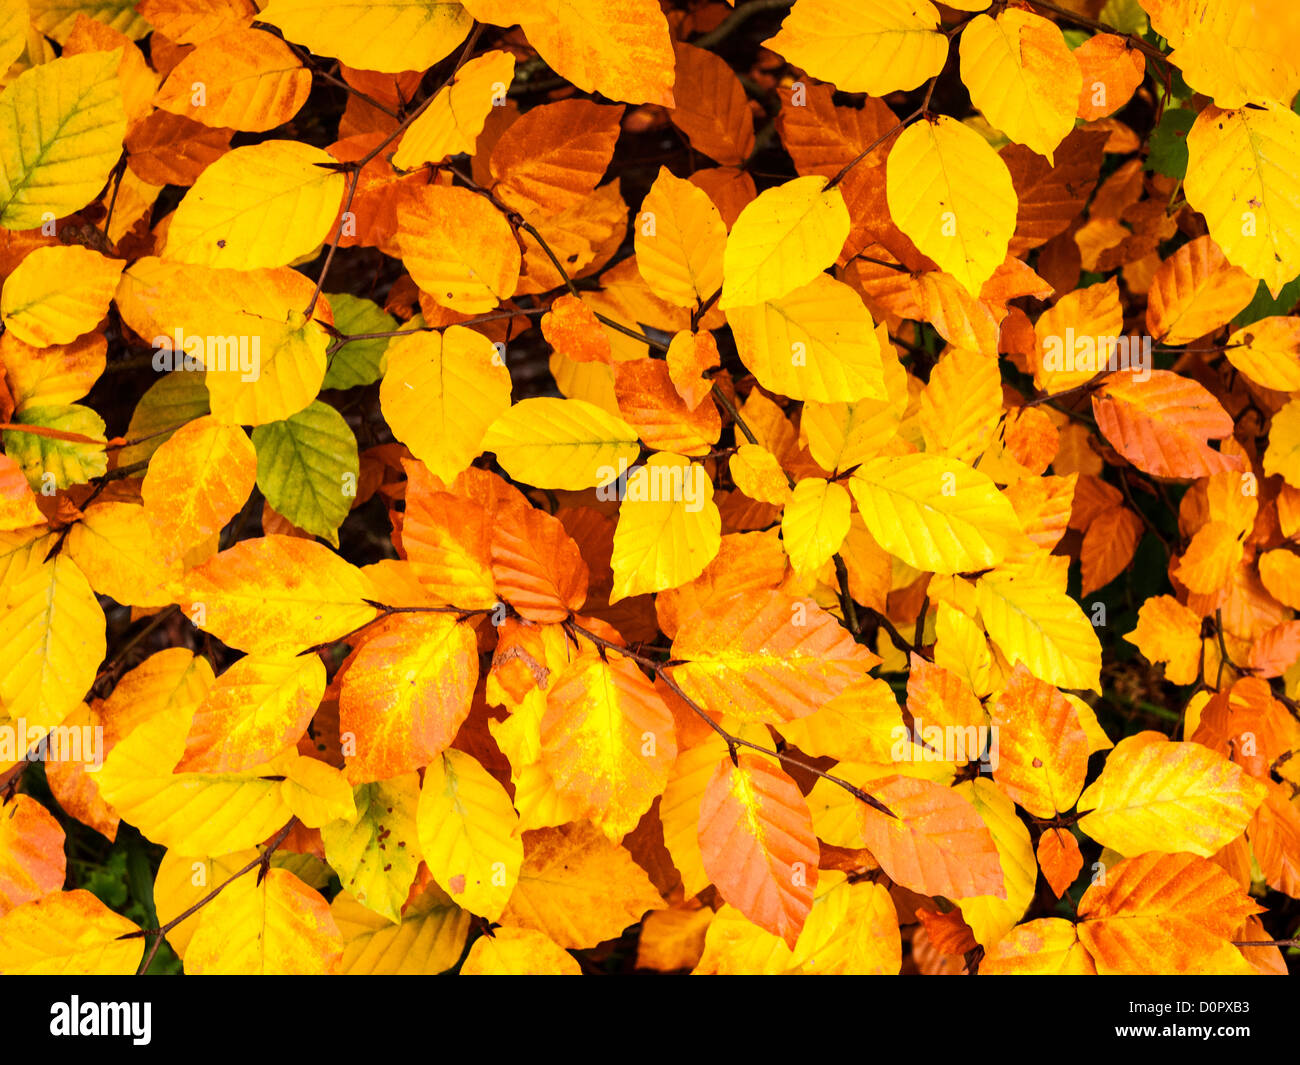 Beech tree leaves displaying their vivid autumn colour Stock Photo